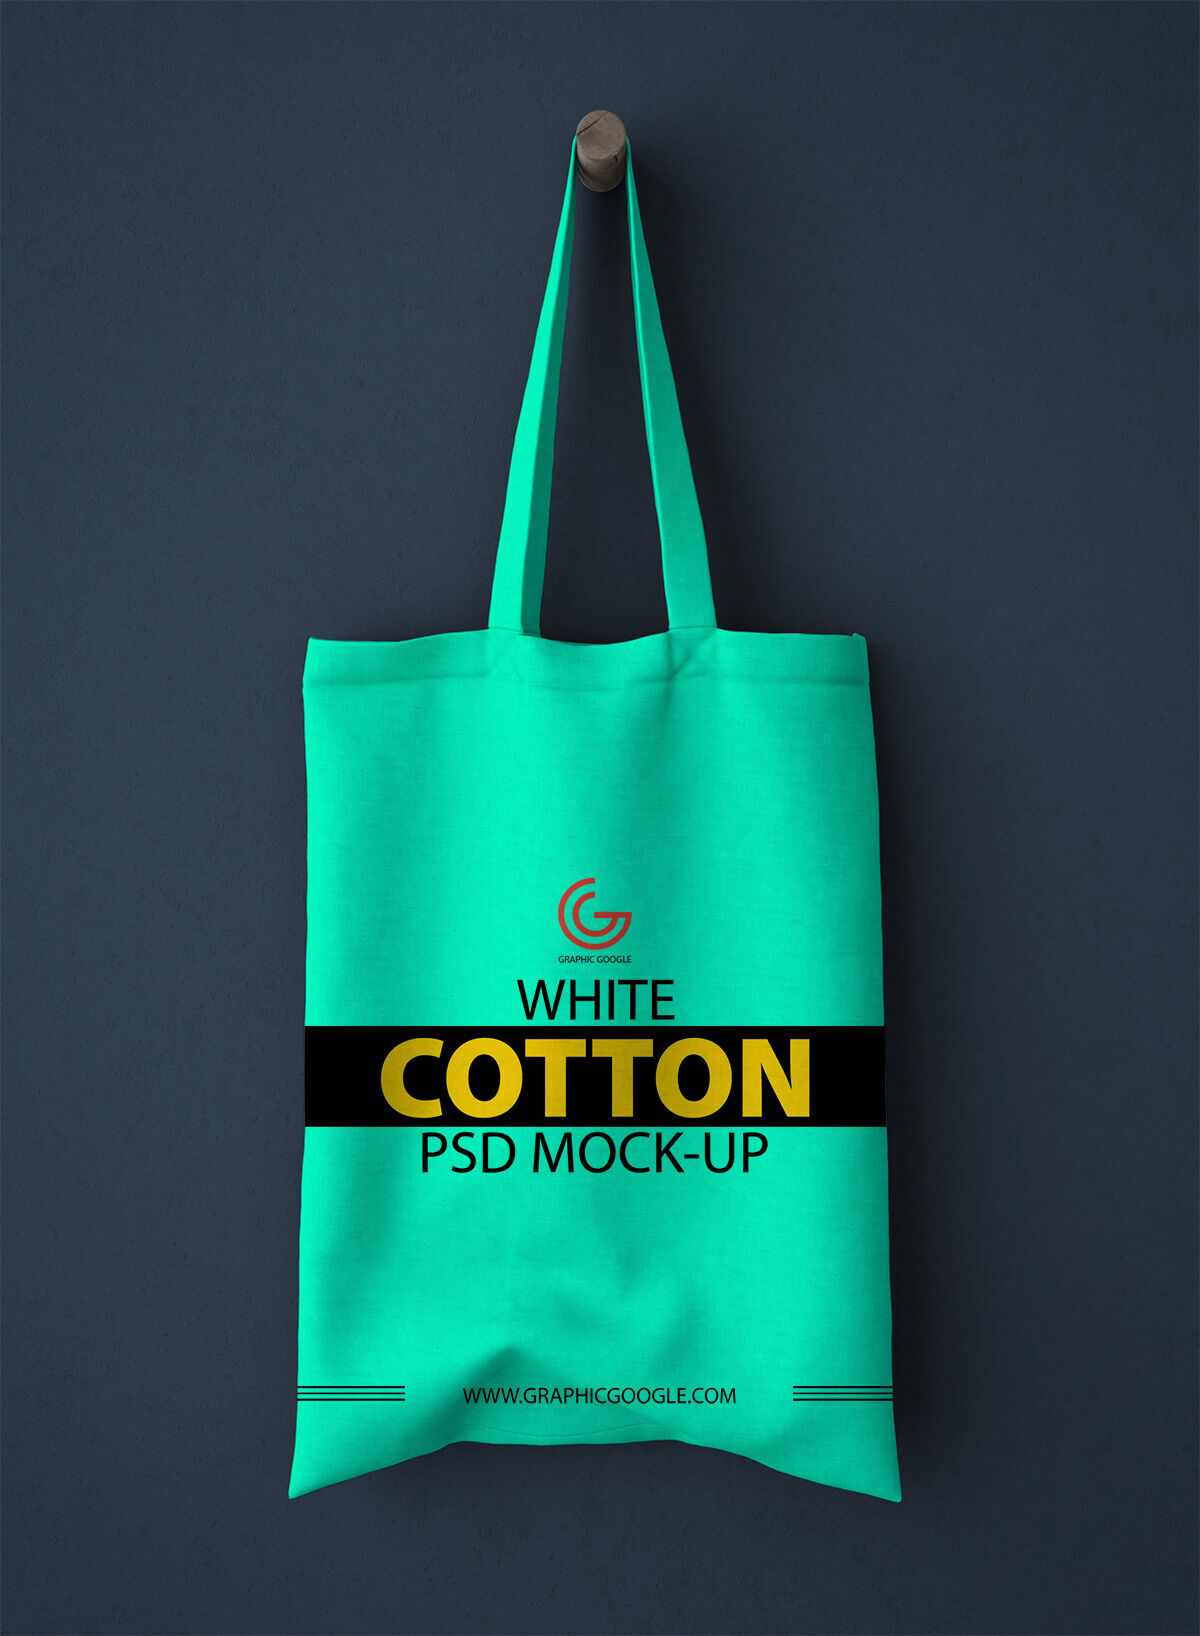 Shopping Foldable Cotton Bag Mockup Hanging on Wall Background FREE PSD